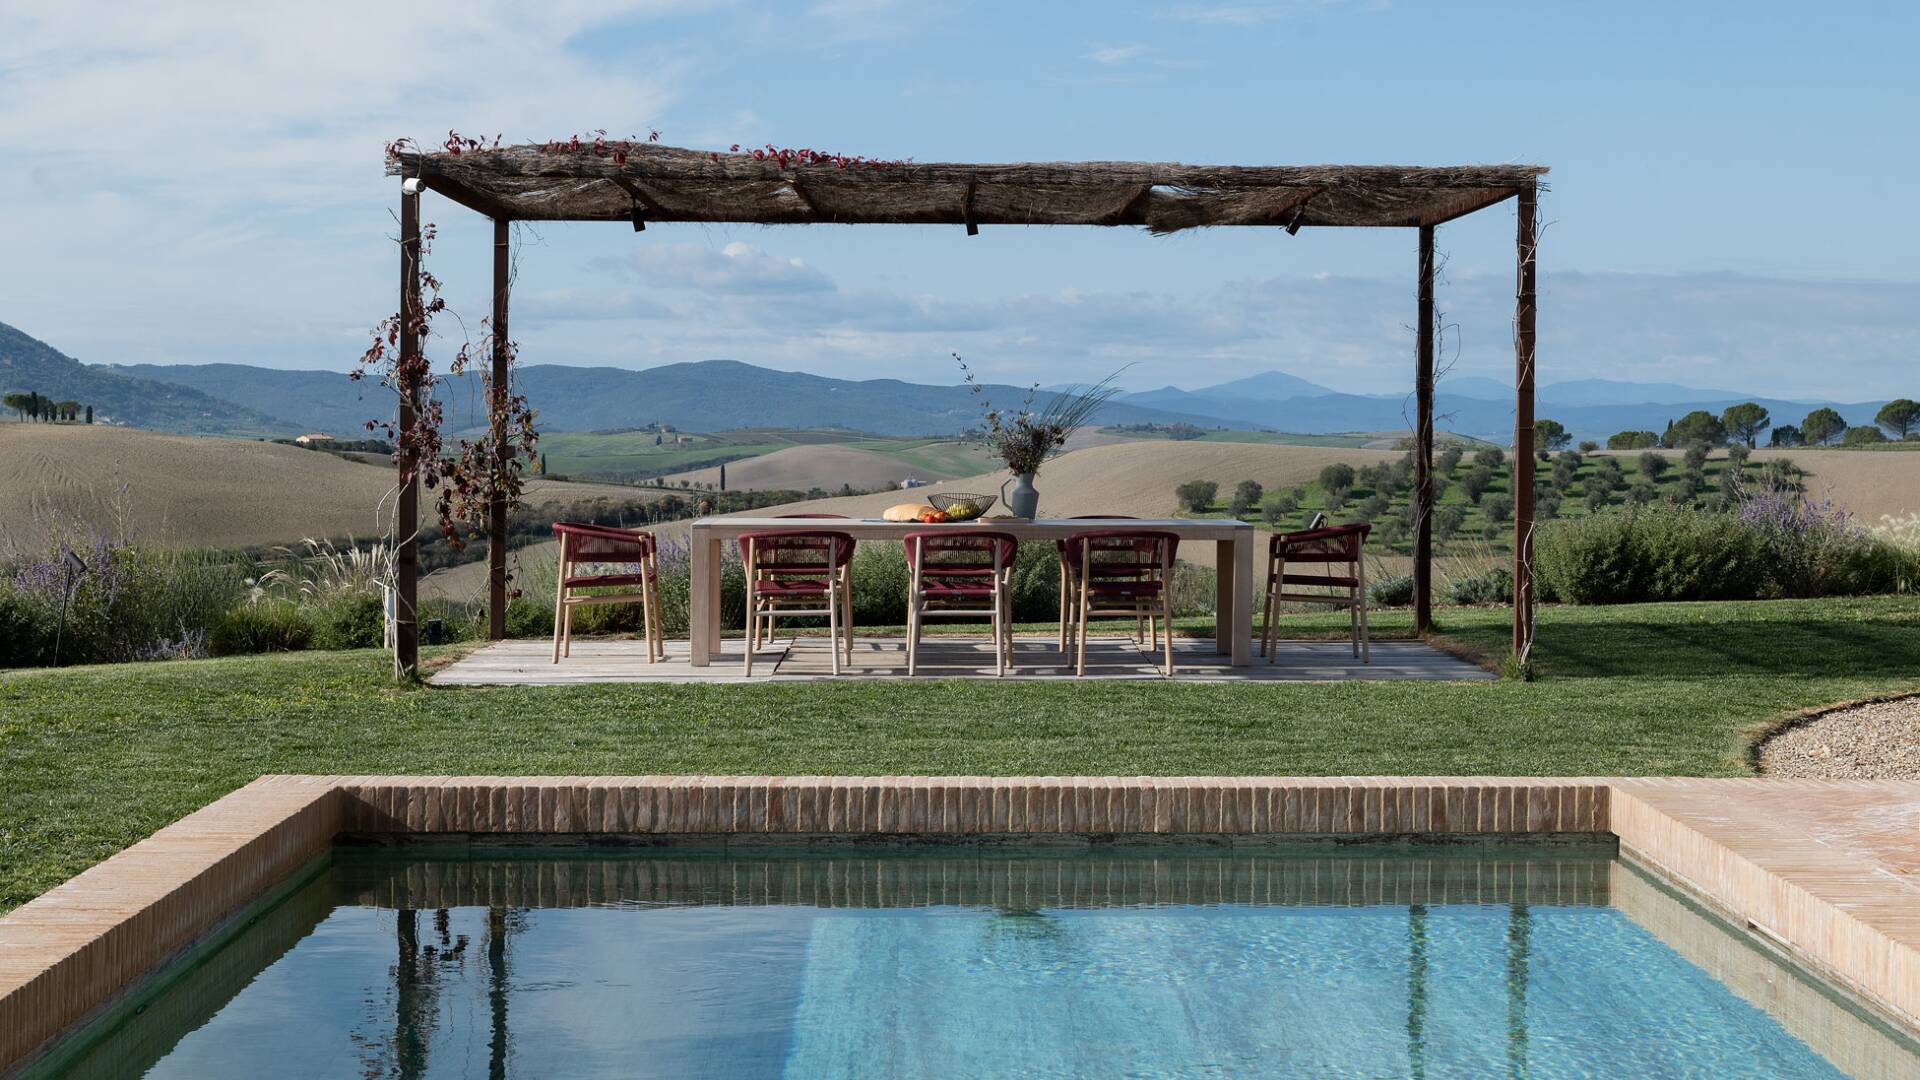 al fresco dining area with countryside view